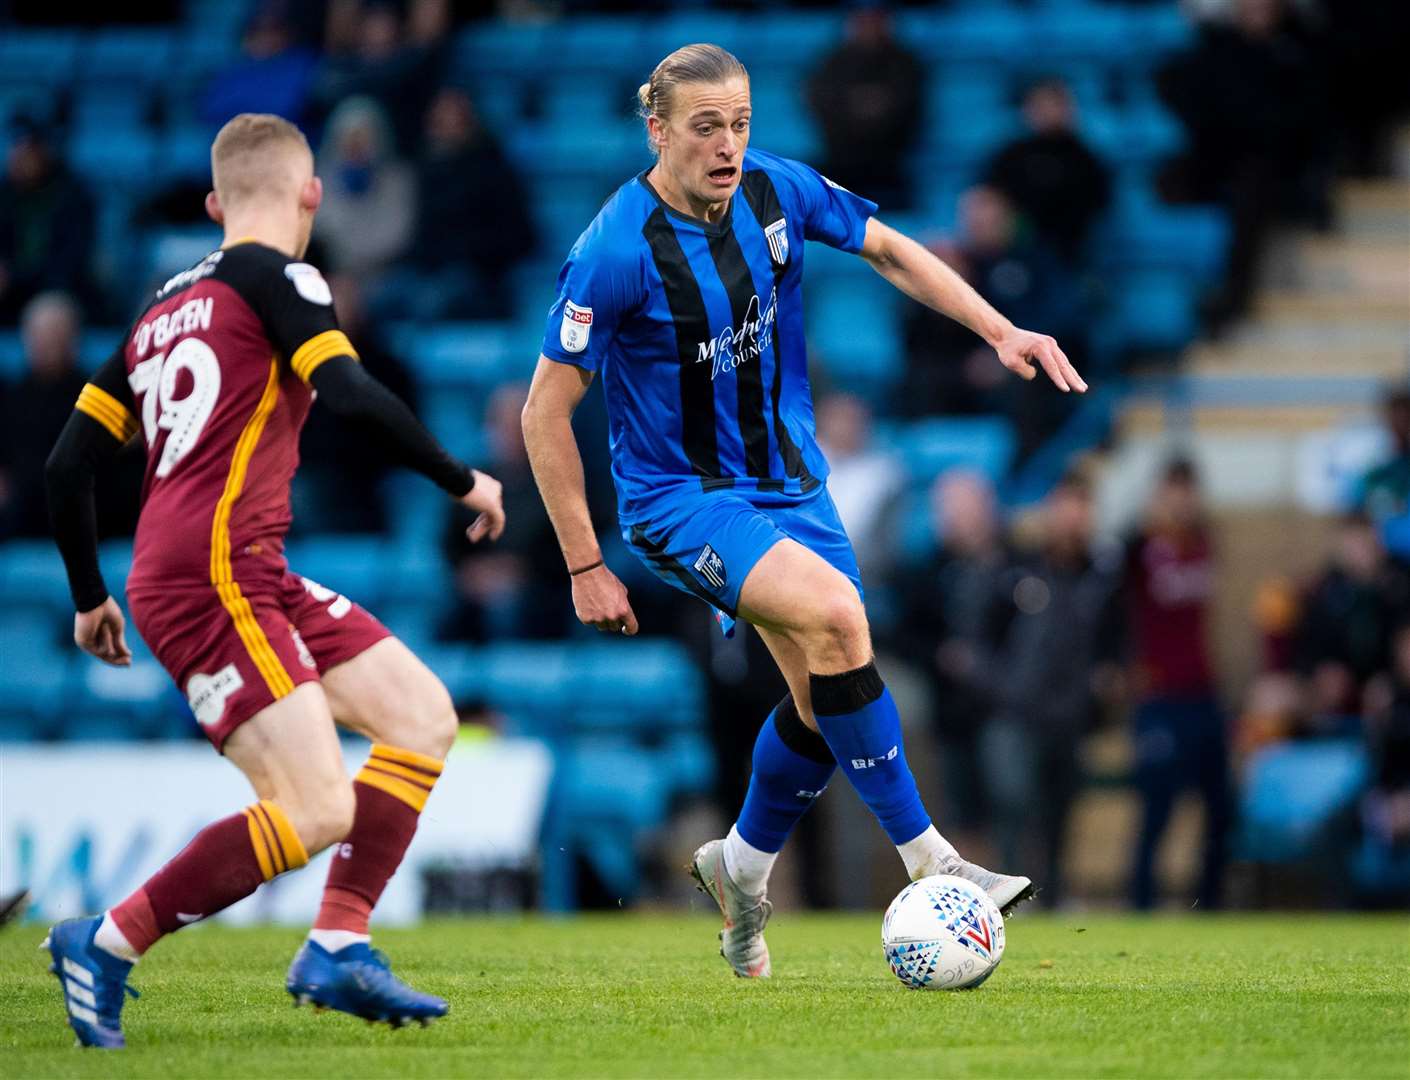 Gillingham striker Tom Eaves takes on Bradford City's Lewis O'Brien Picture: Ady Kerry